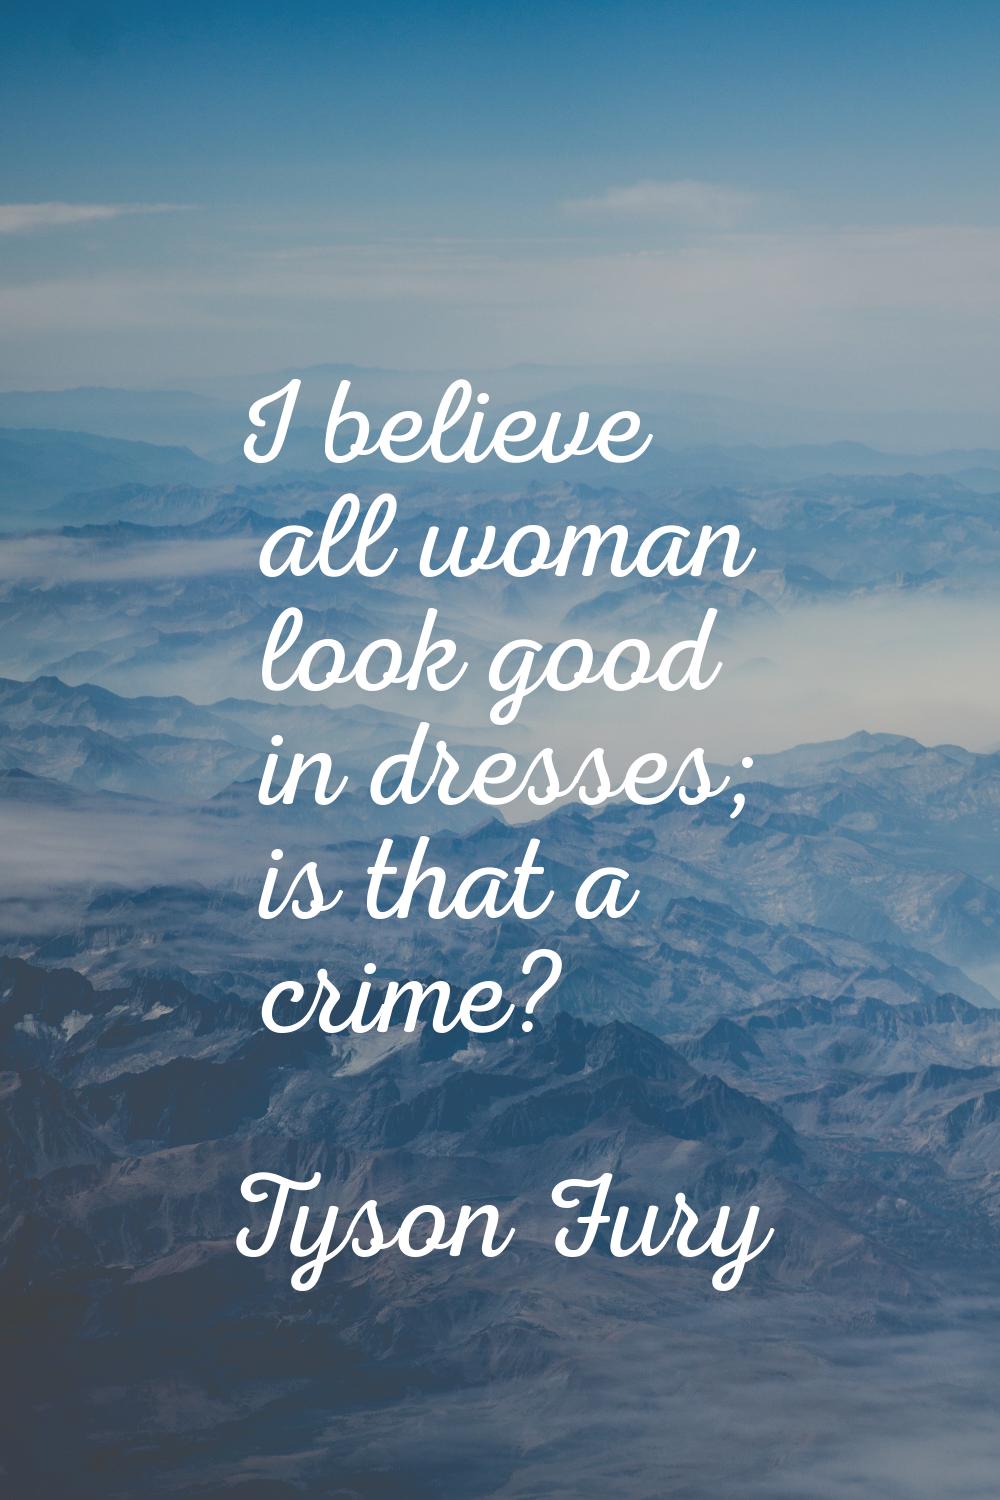 I believe all woman look good in dresses; is that a crime?